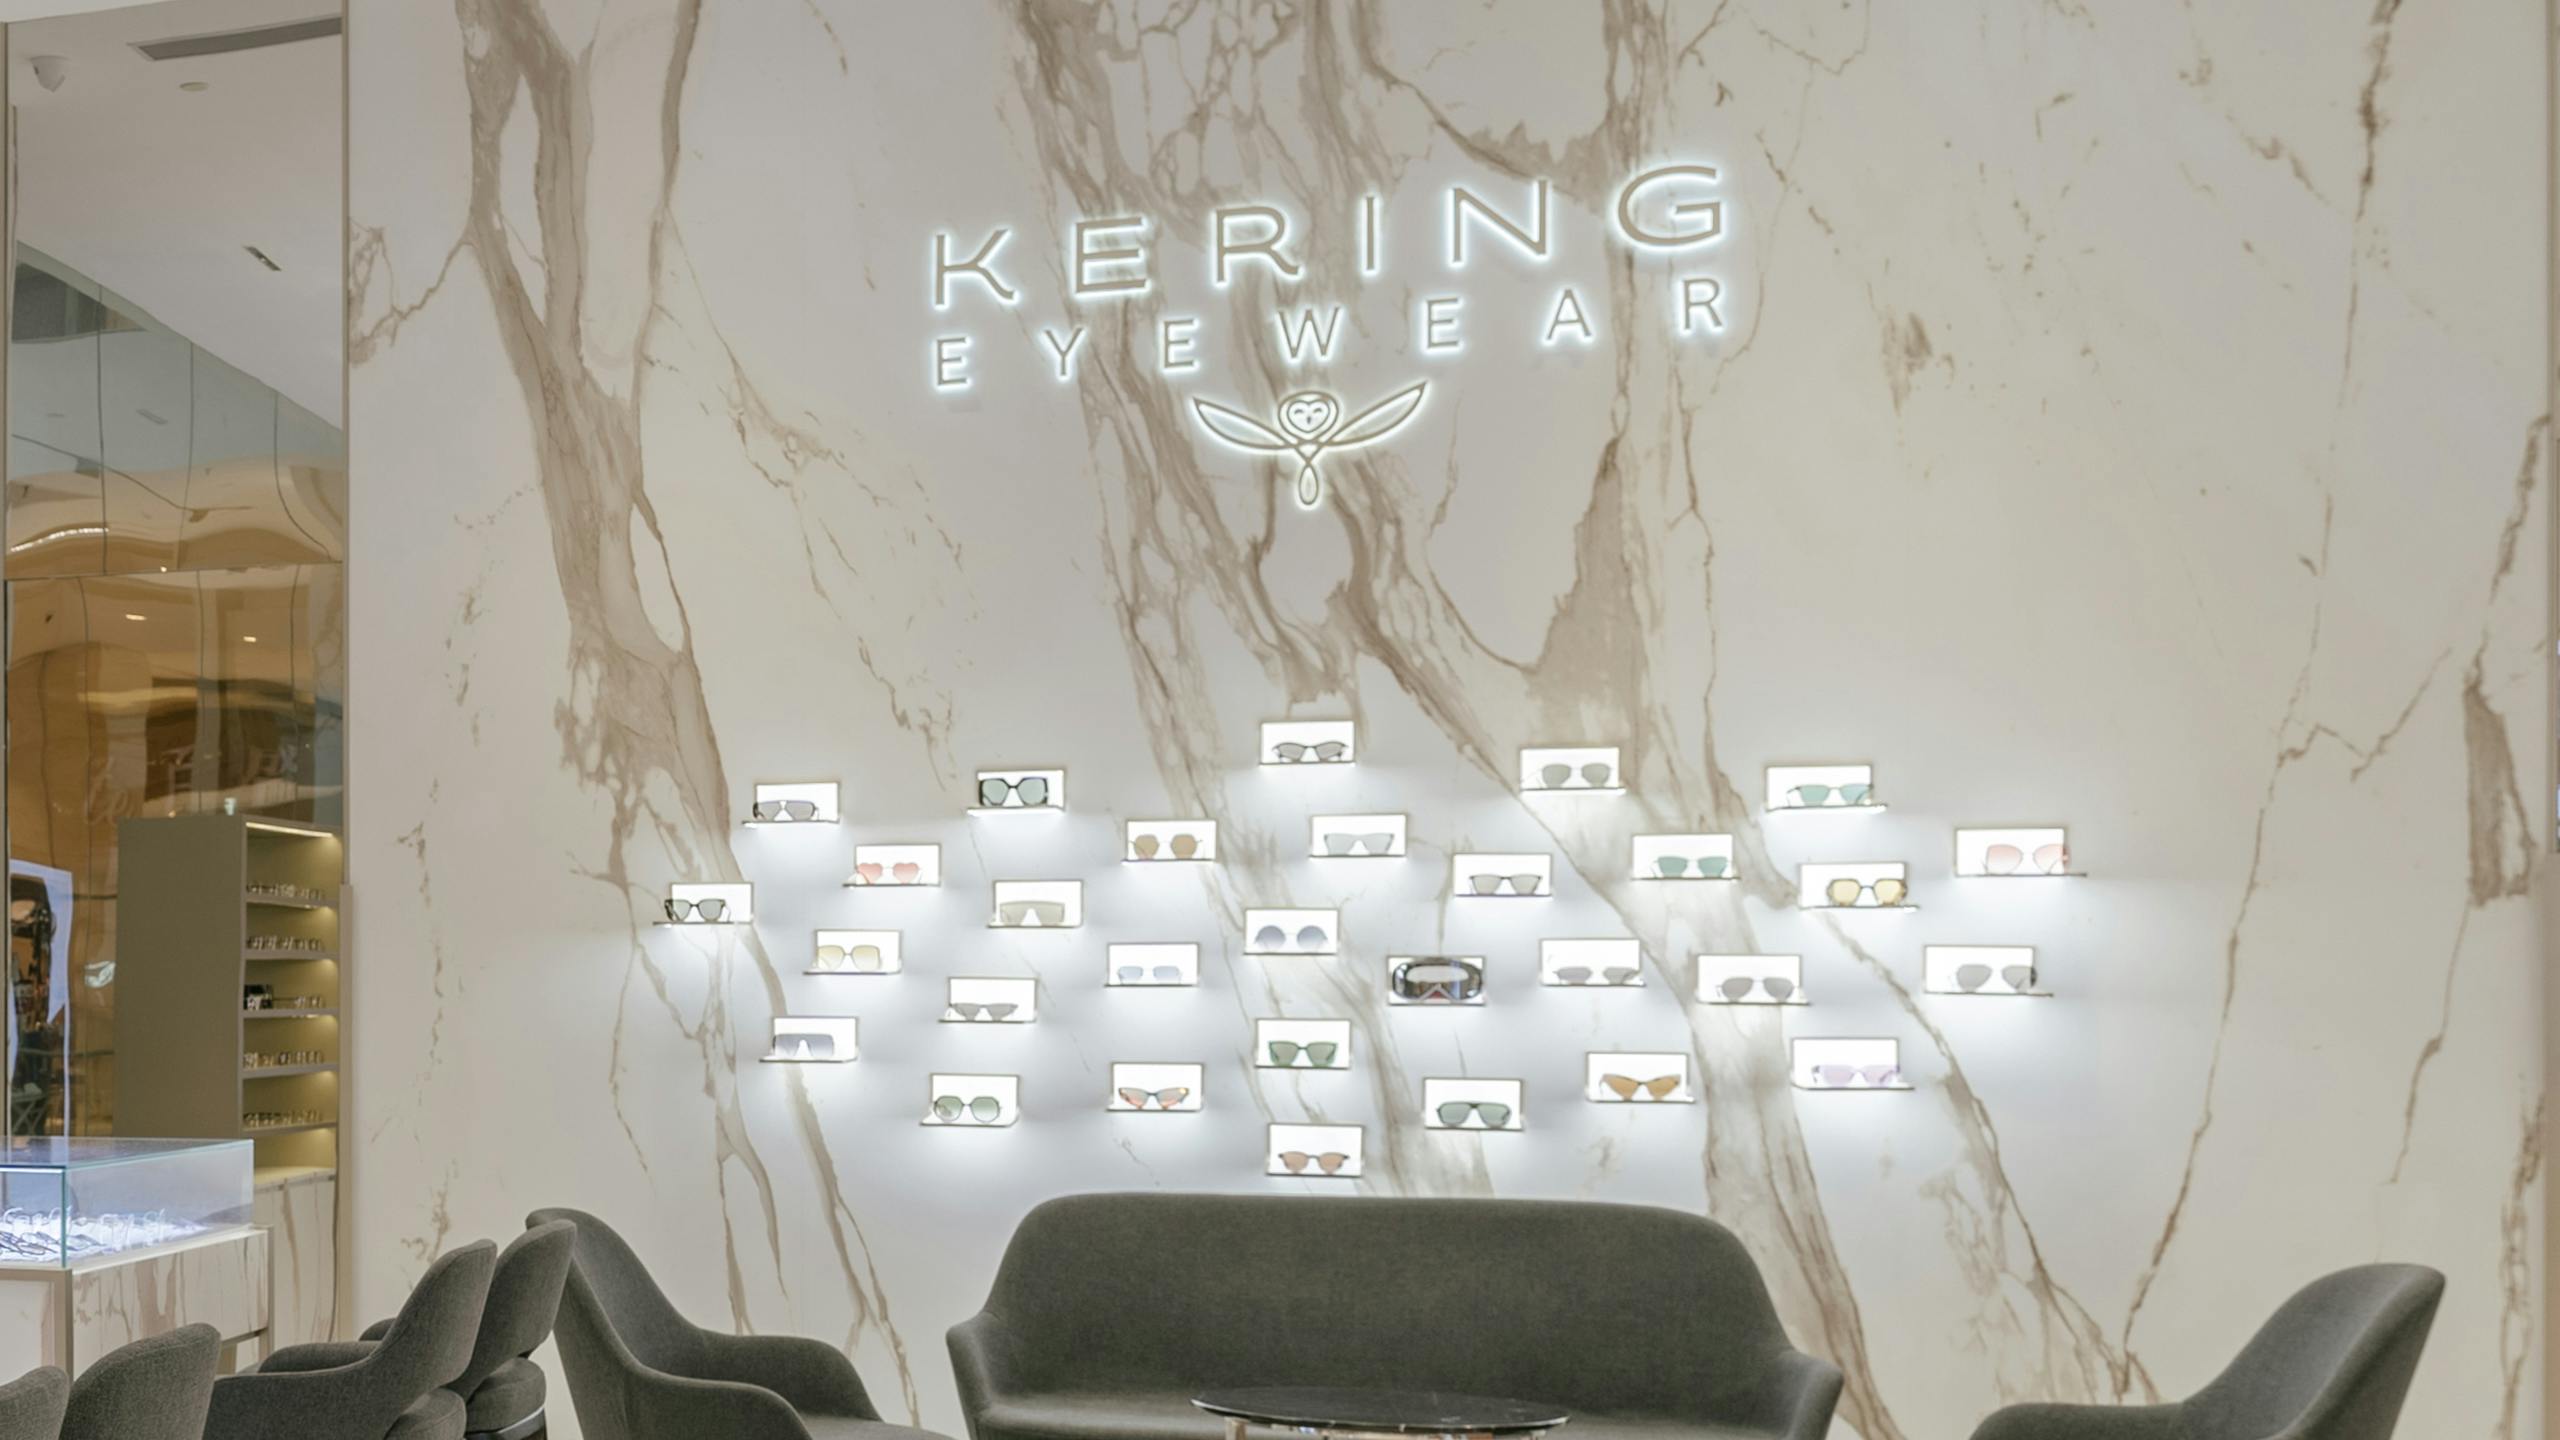 Kering Eyewear first concept store in Malaysia